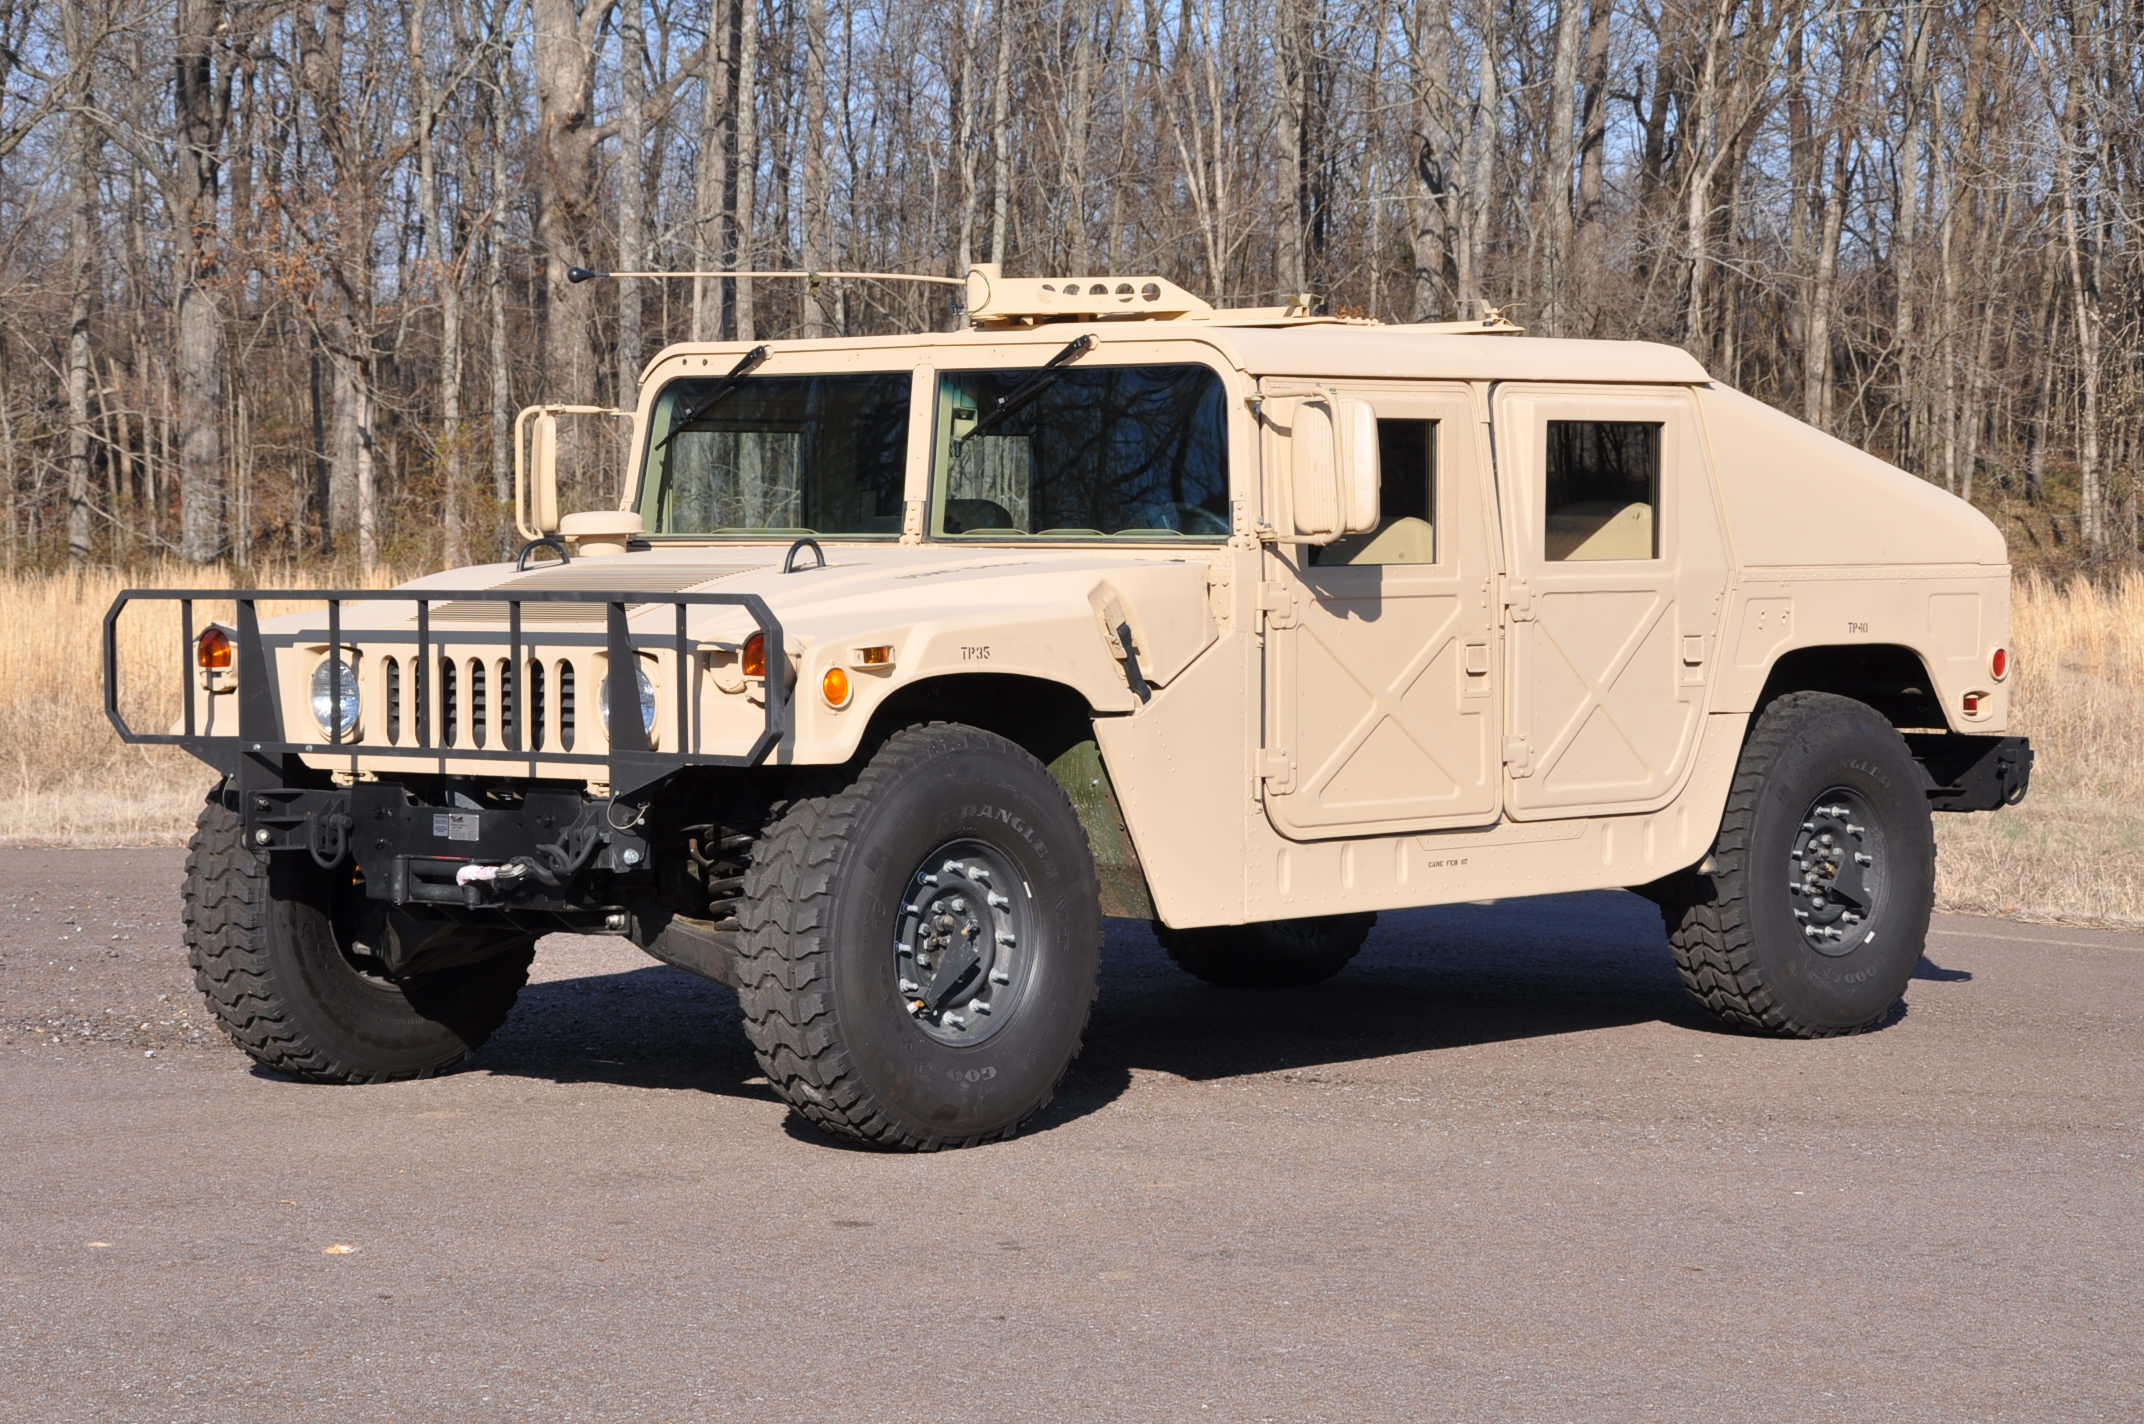 Humvee X Doors & However Those Did Not Protect Against IEDs.